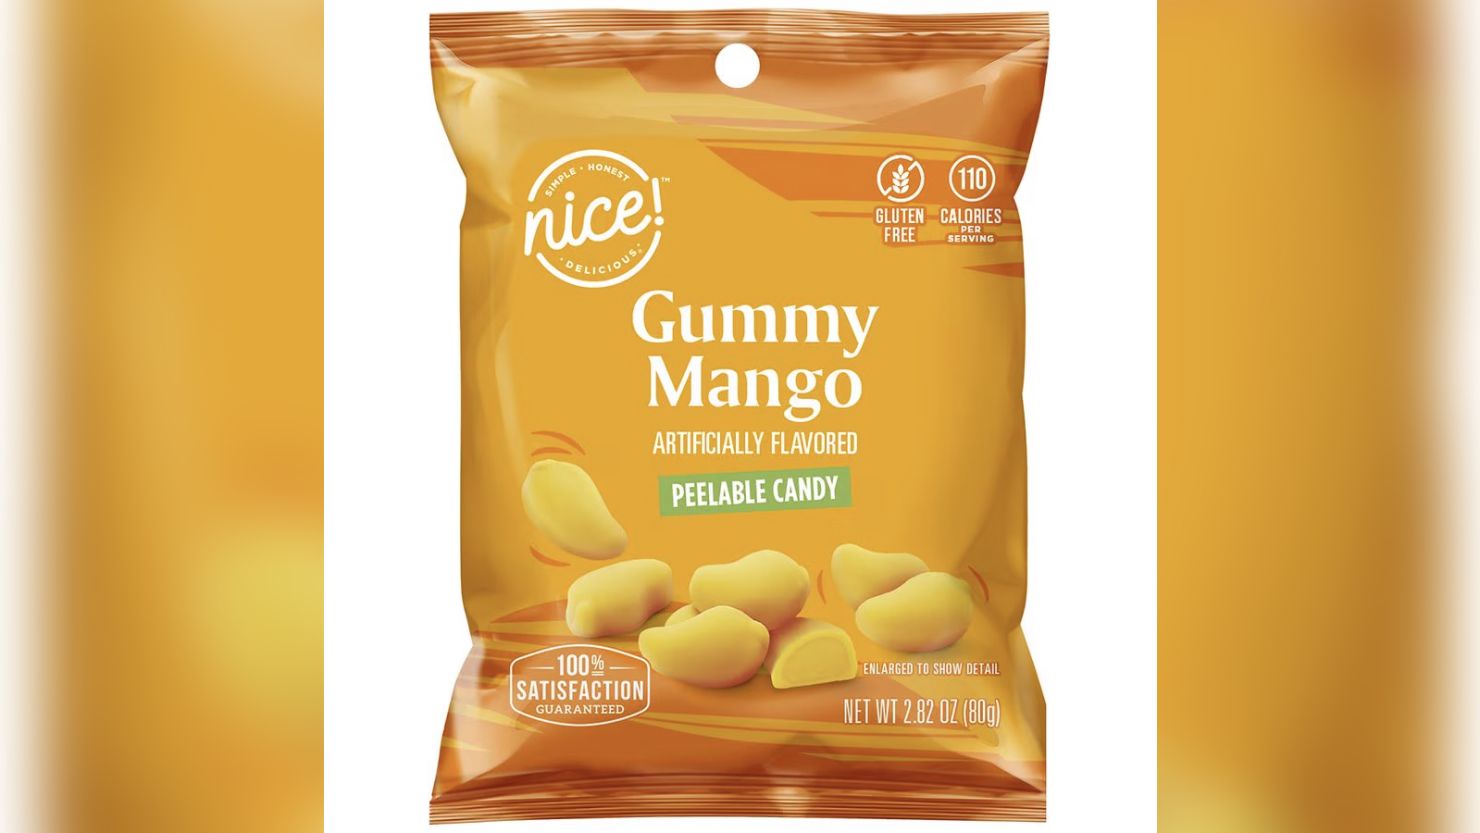 Walgreens landed an unexpected viral hit late last year with its peelable mango gummy candy.